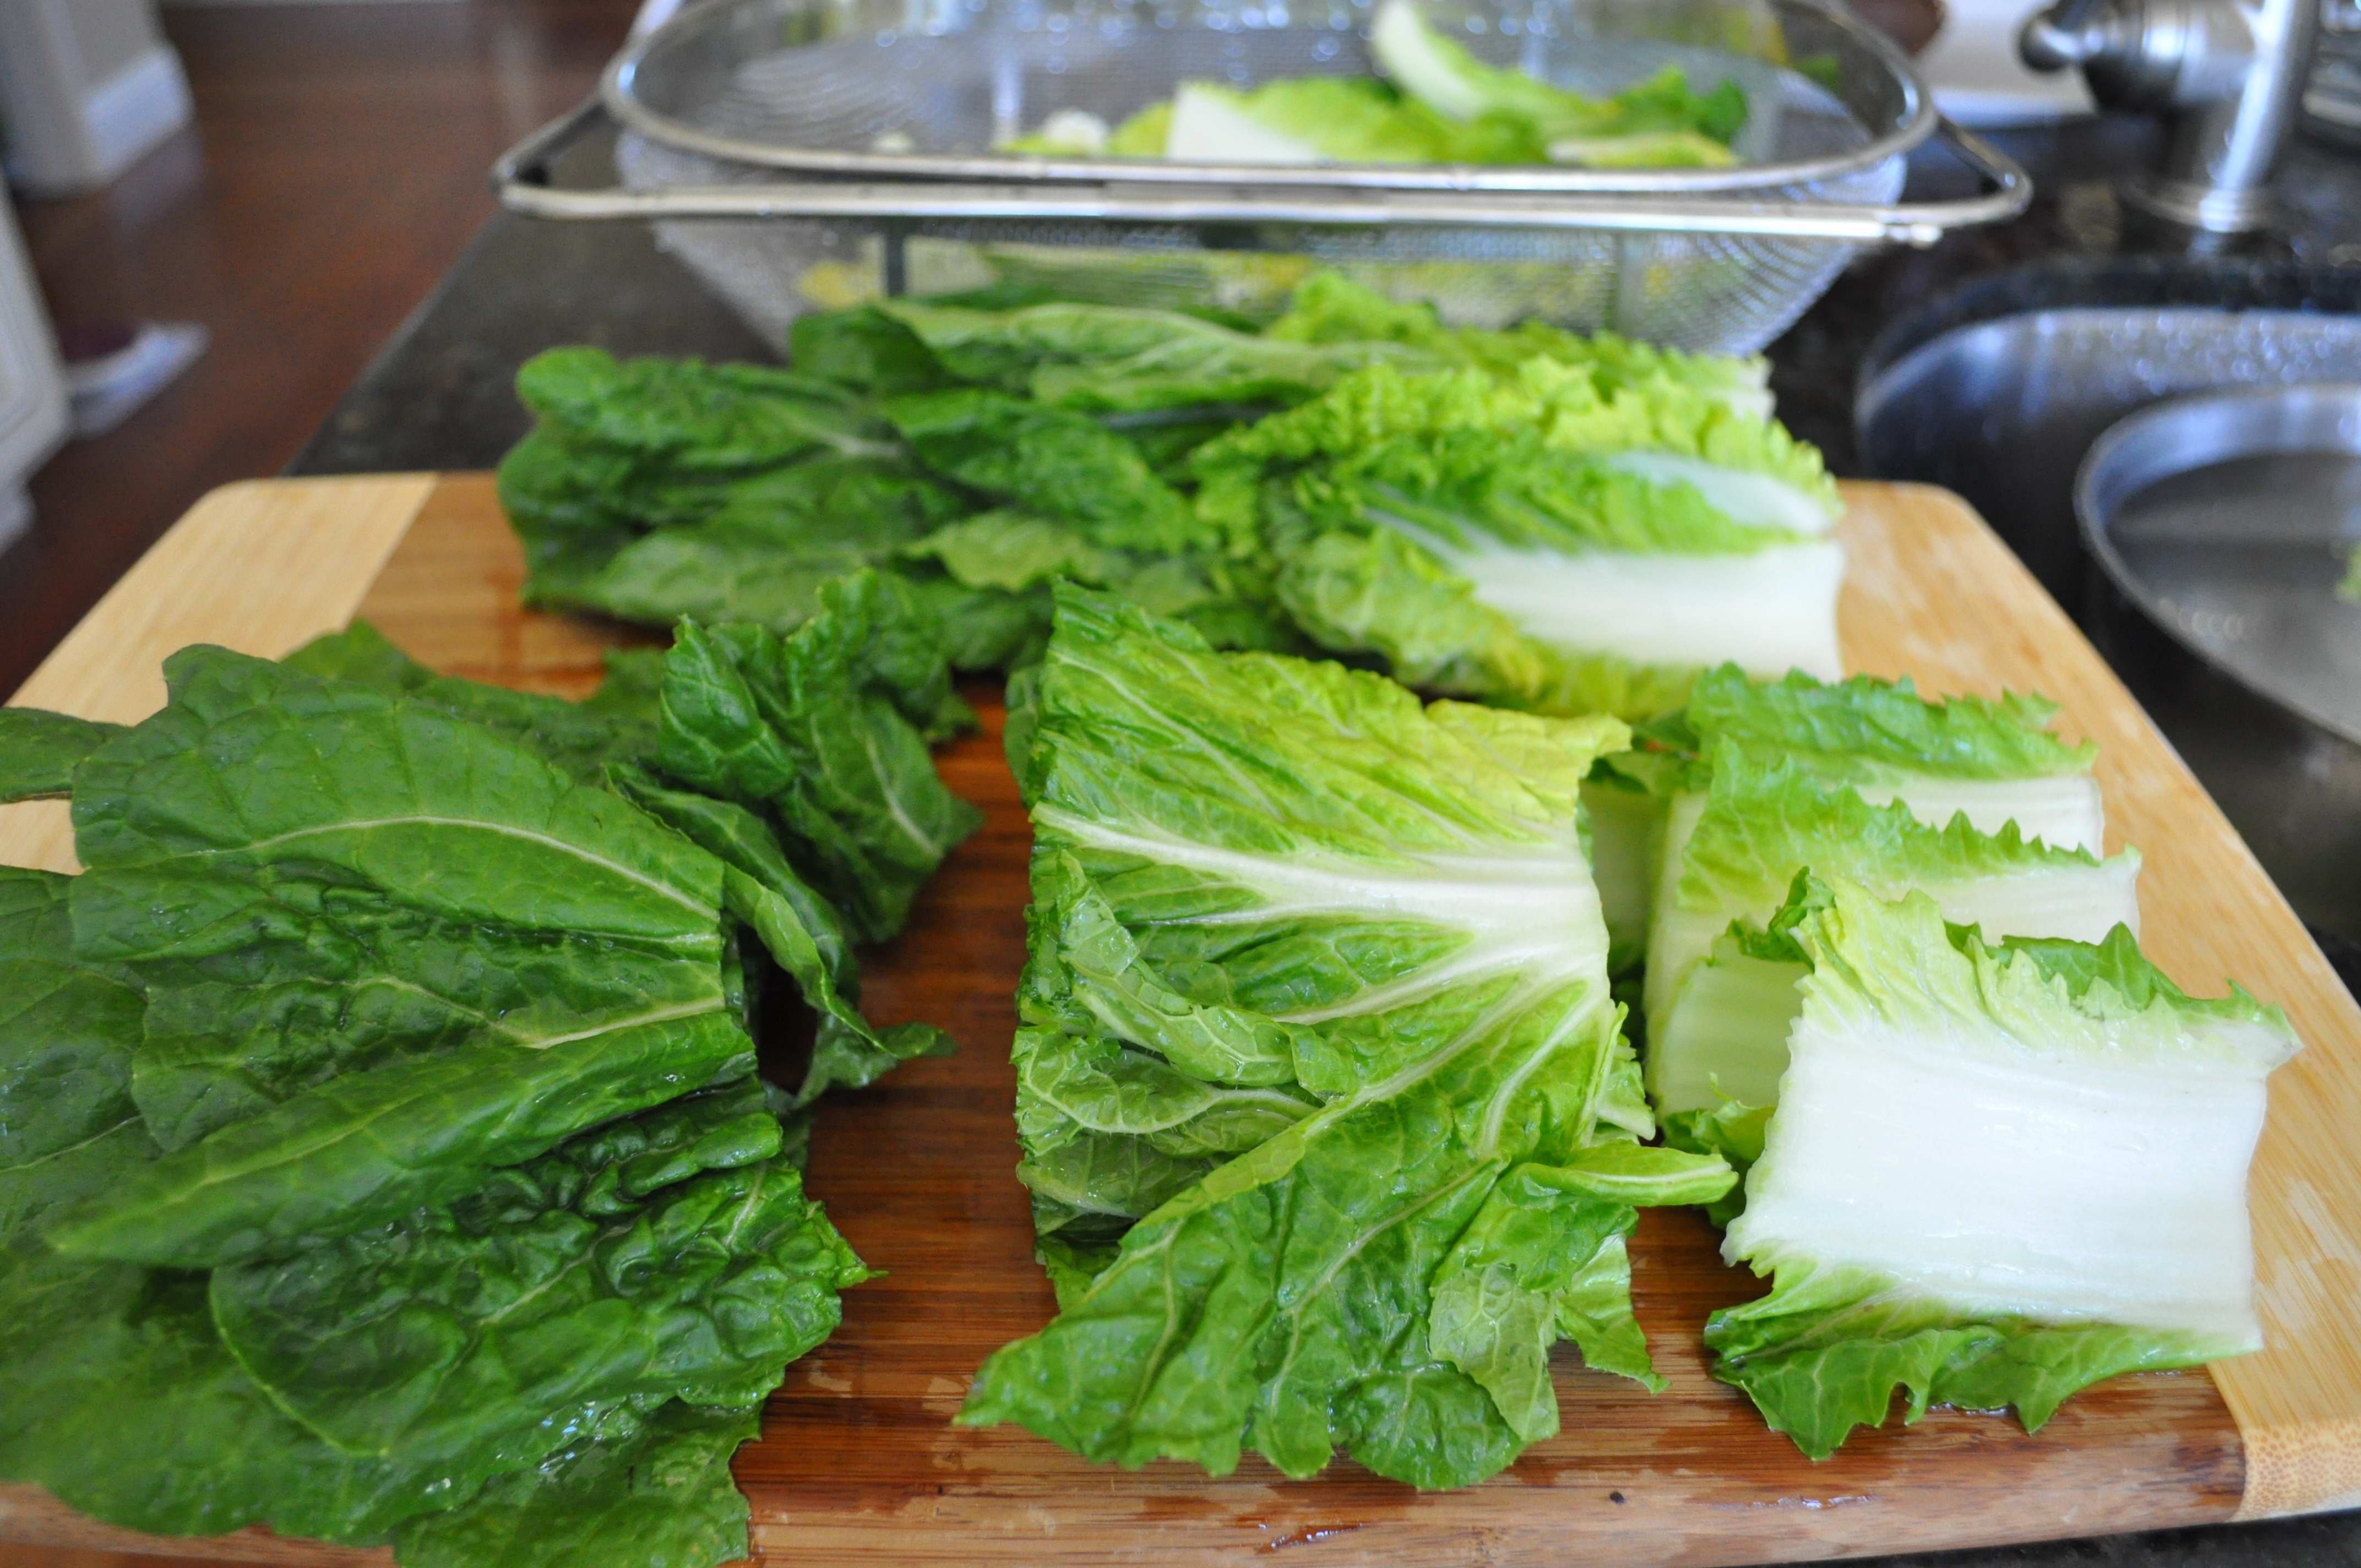 cut cabbage 3 inch long pieces